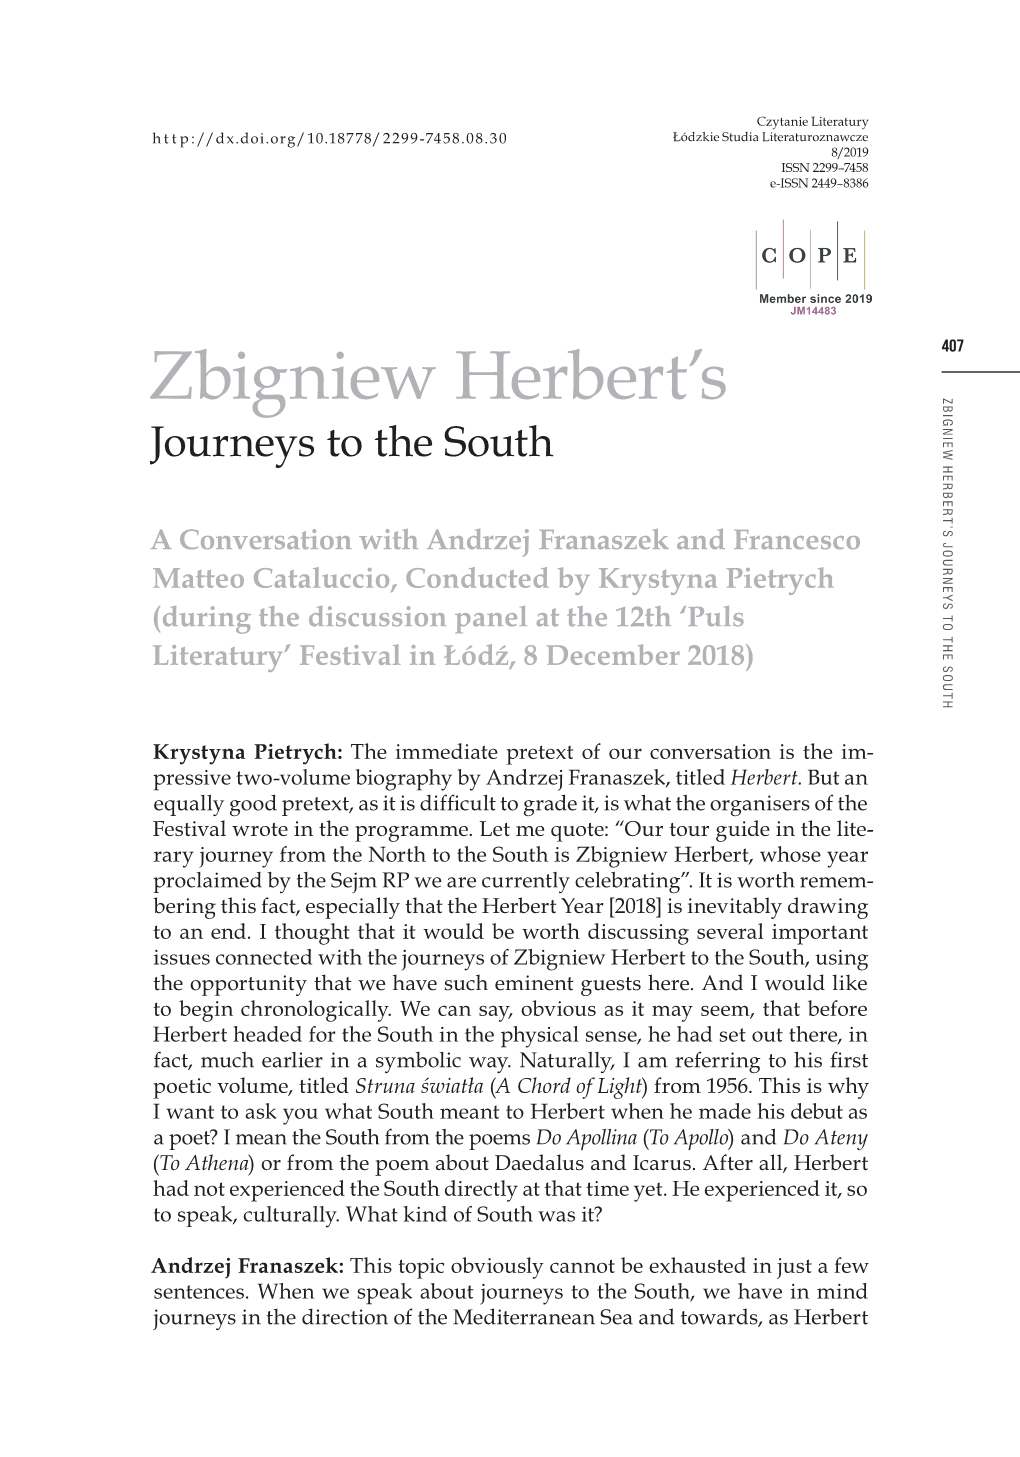 Zbigniew Herbert's Journeys to the South. a Conversation with Andrzej